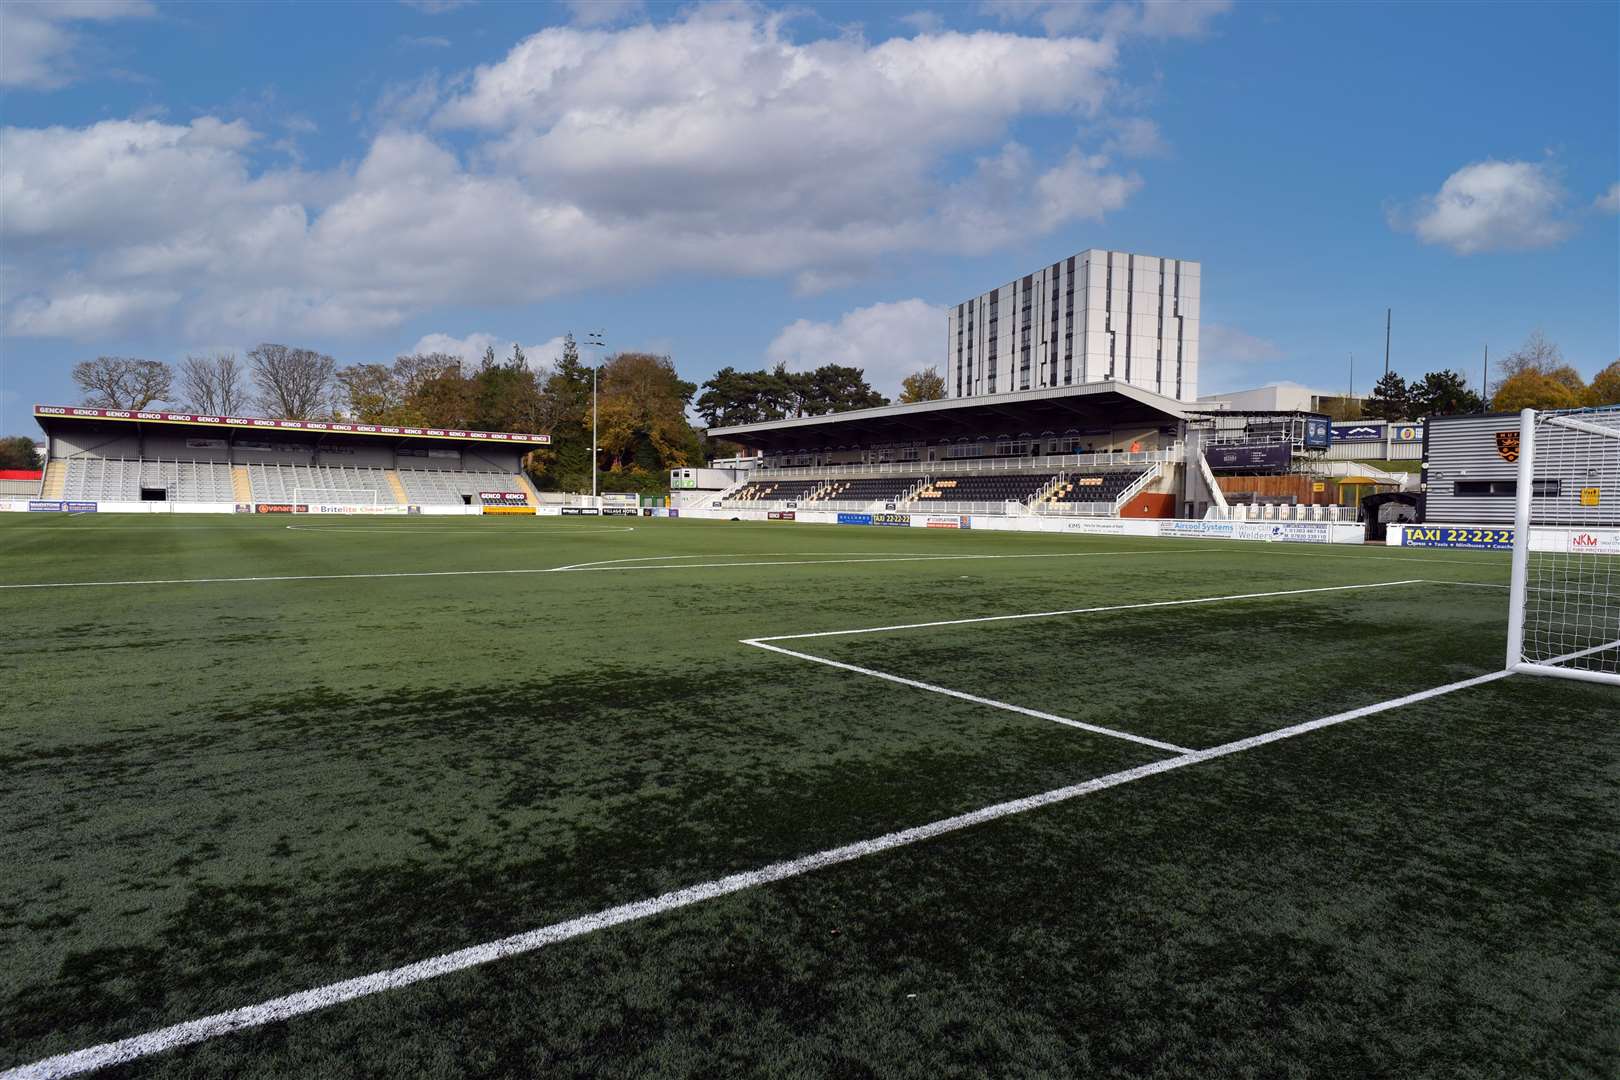 England matches will be shown at the Spitfire Ground in the Gallagher Stadium, home to Maidstone United FC